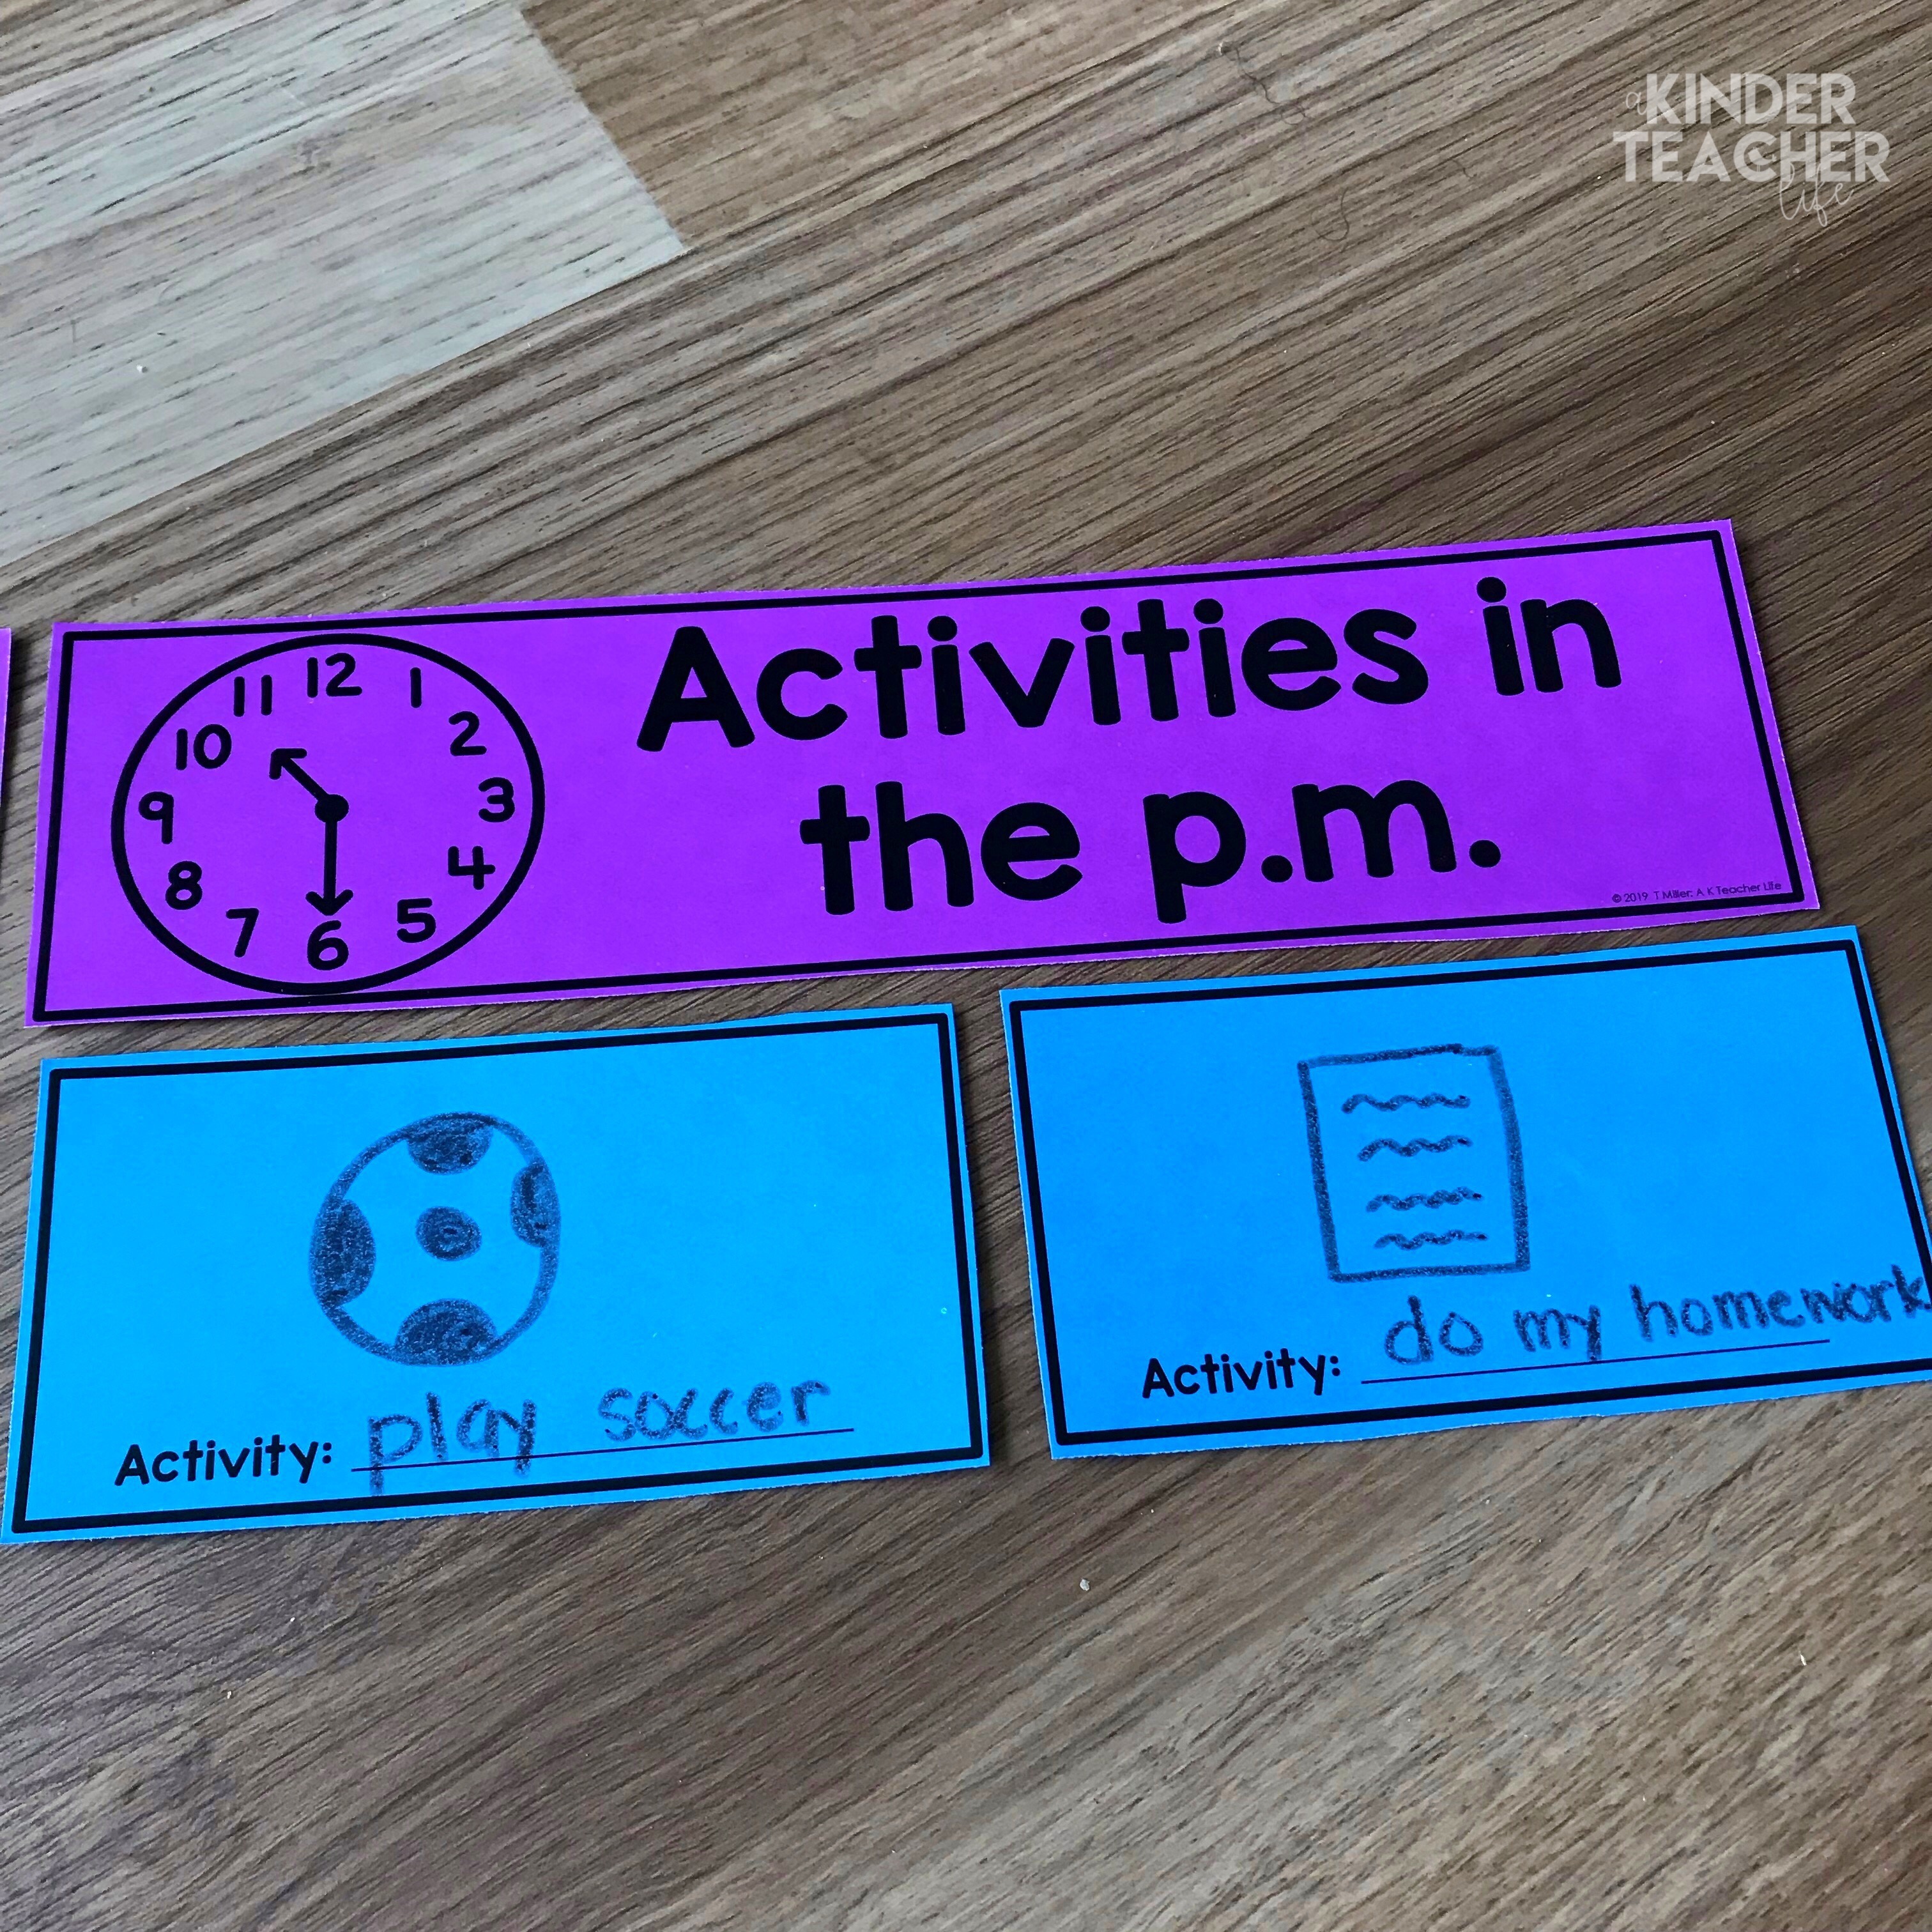 Draw and sort activities you do in the a.m. and p.m. - Hands-on telling time math center activities for first grade students. 